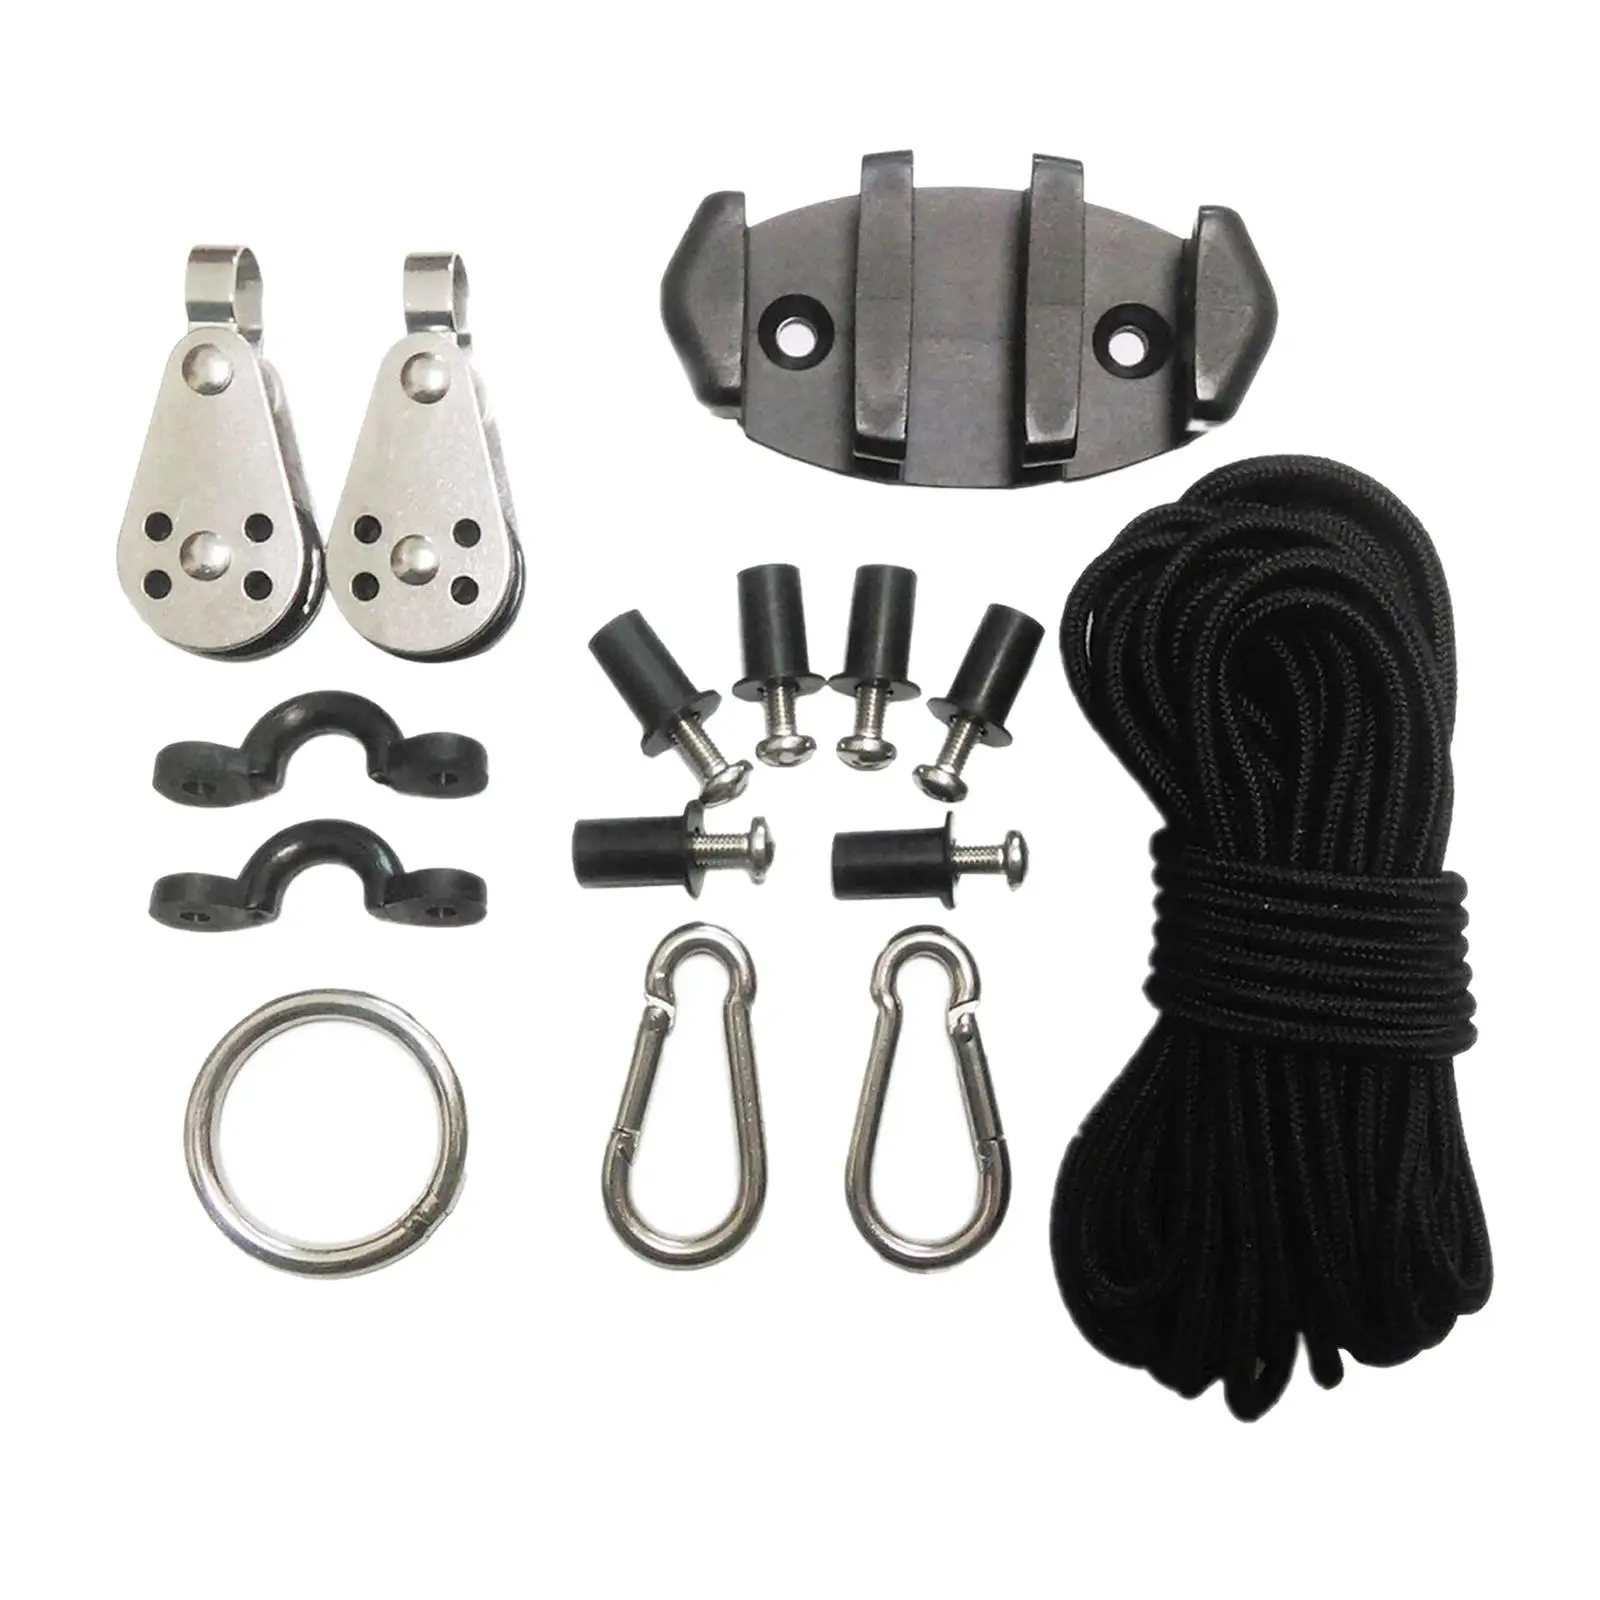 

Kayak Canoes Boat Anchor Trolley Kit System w/Pulleys Pad Eye Cleats Ring with Accessories